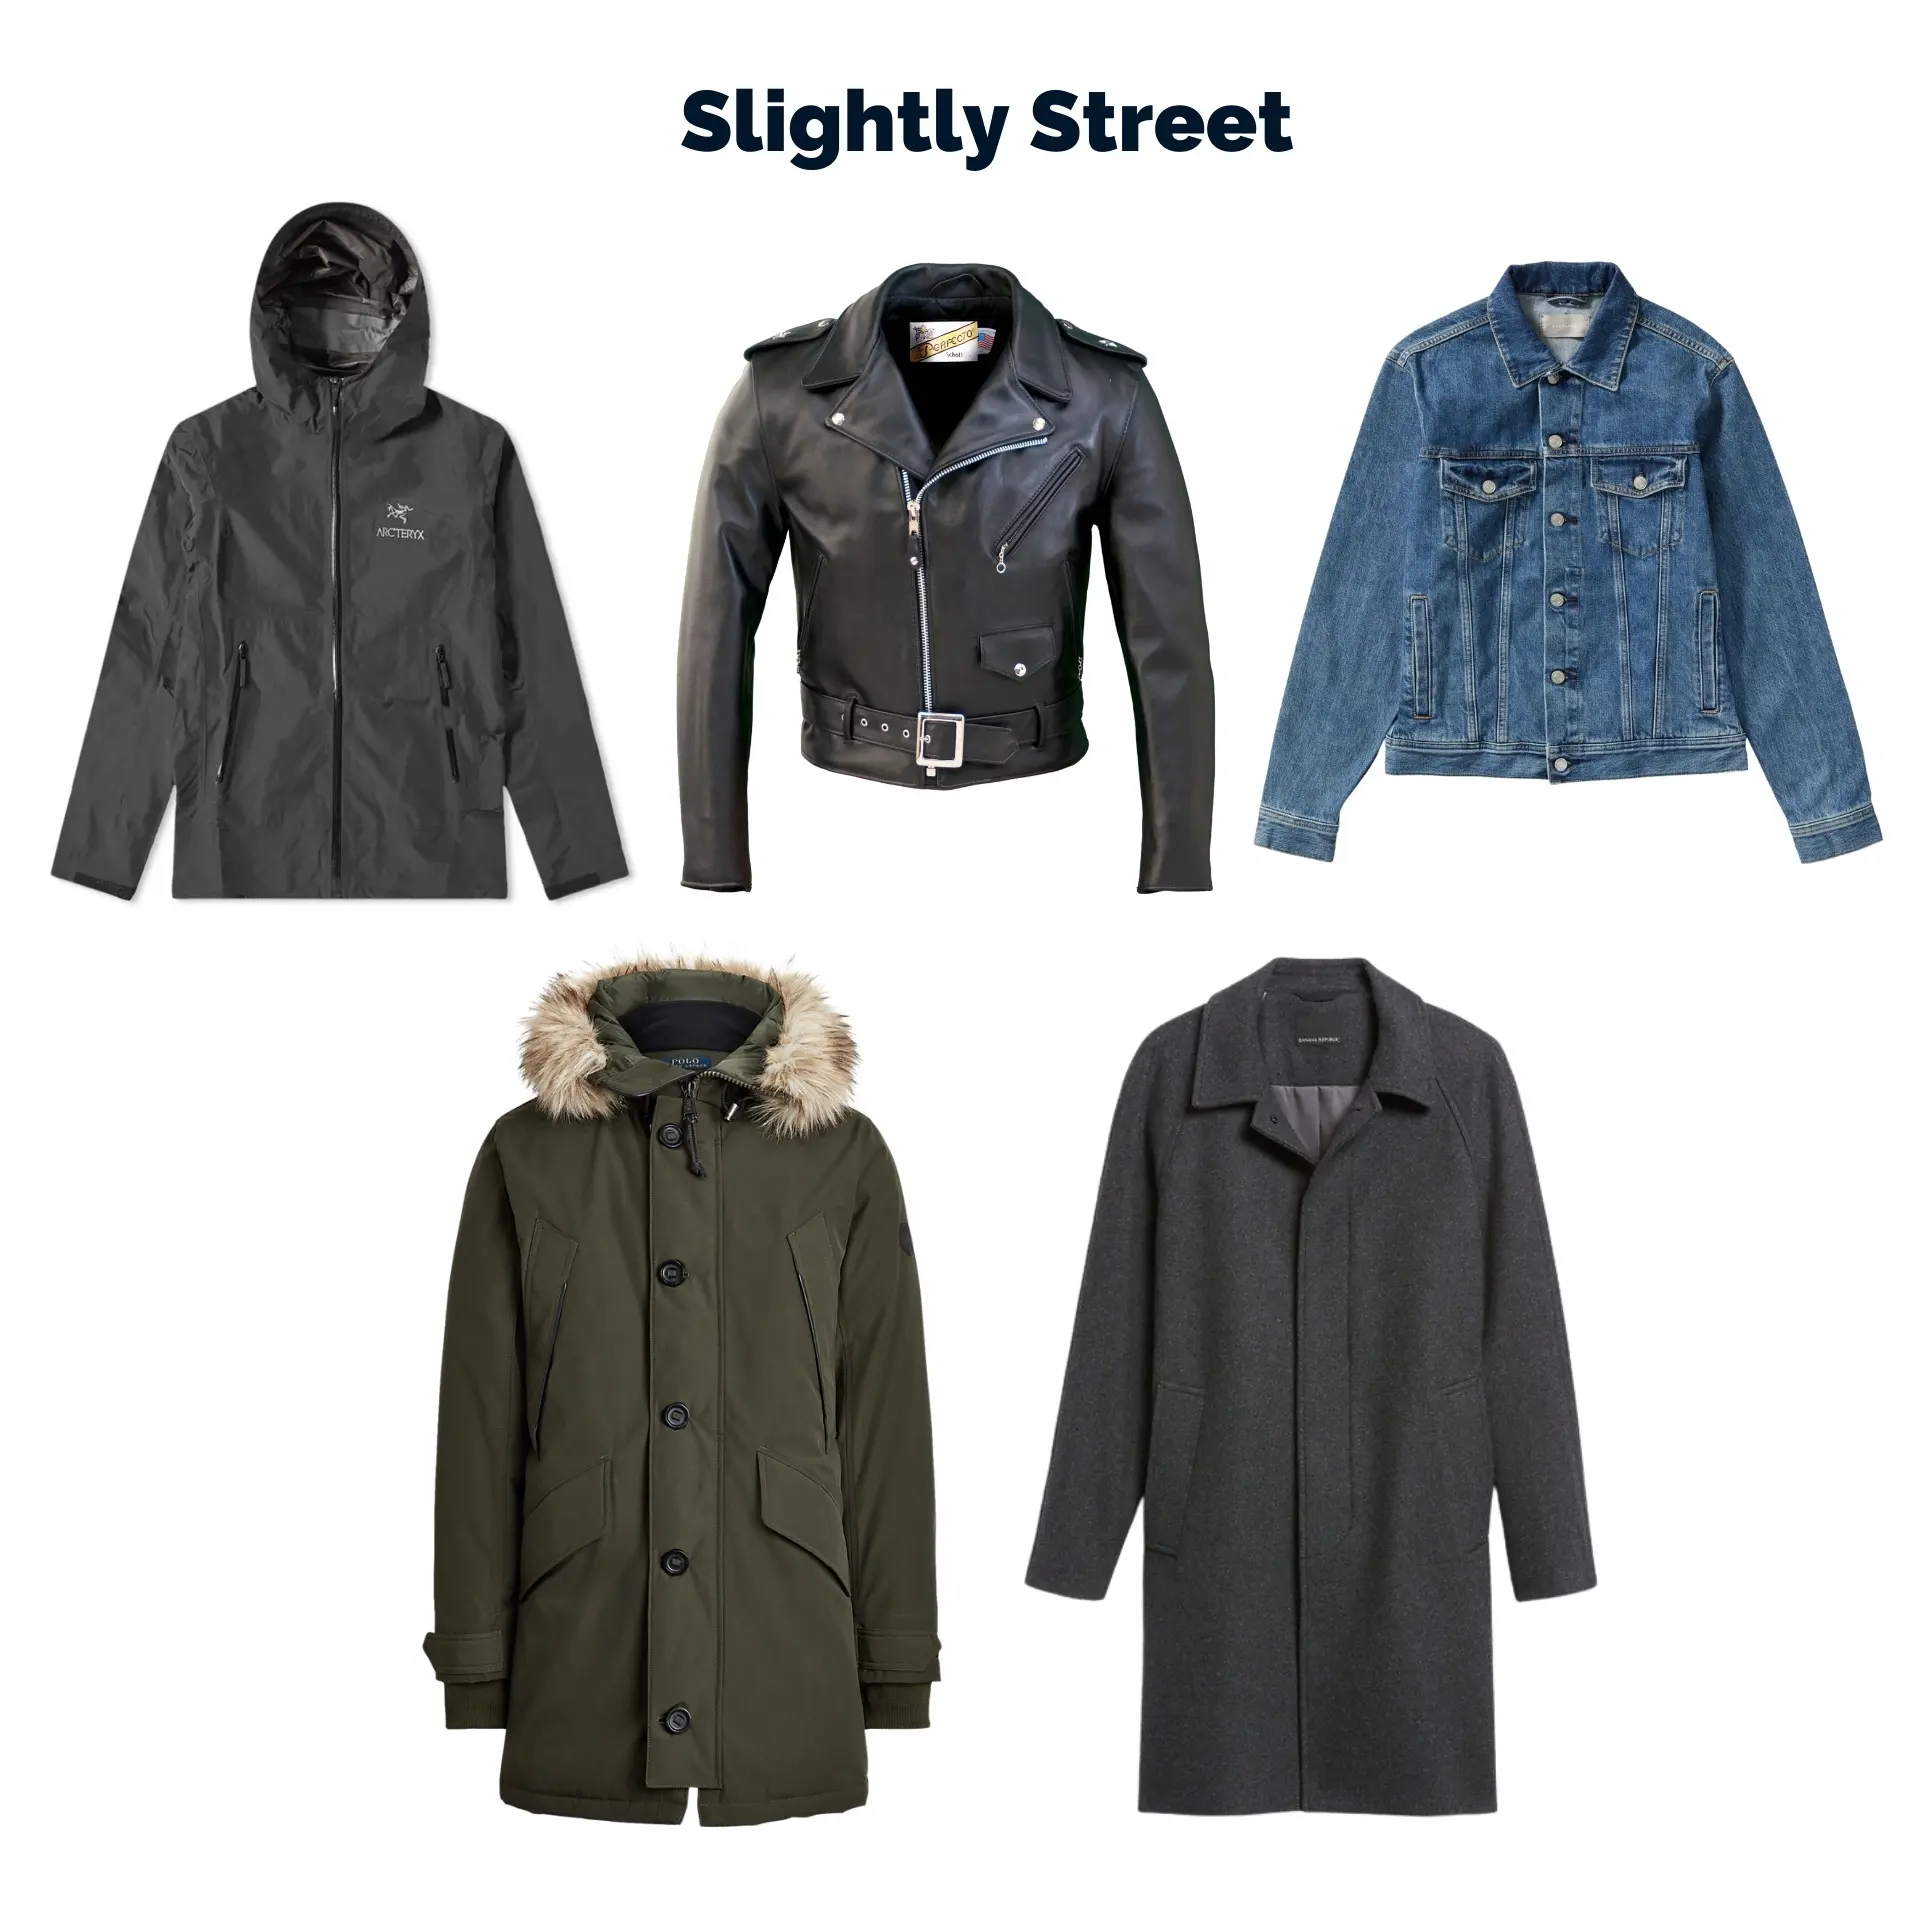 Outerwear collection Slightly Street